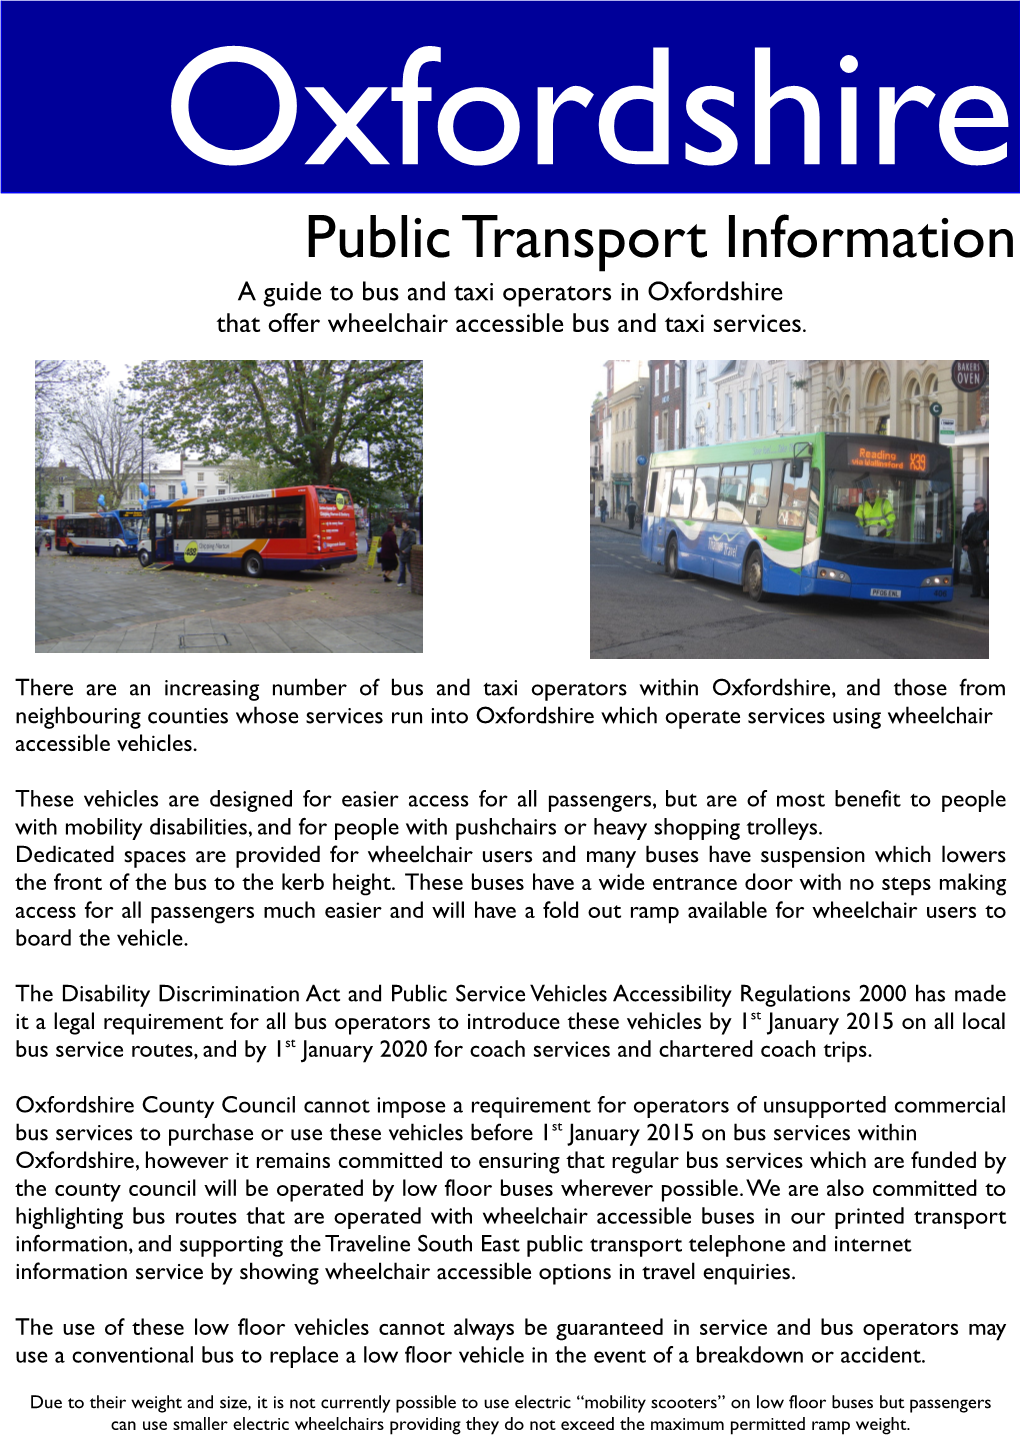 Public Transport Information a Guide to Bus and Taxi Operators in Oxfordshire That Offer Wheelchair Accessible Bus and Taxi Services